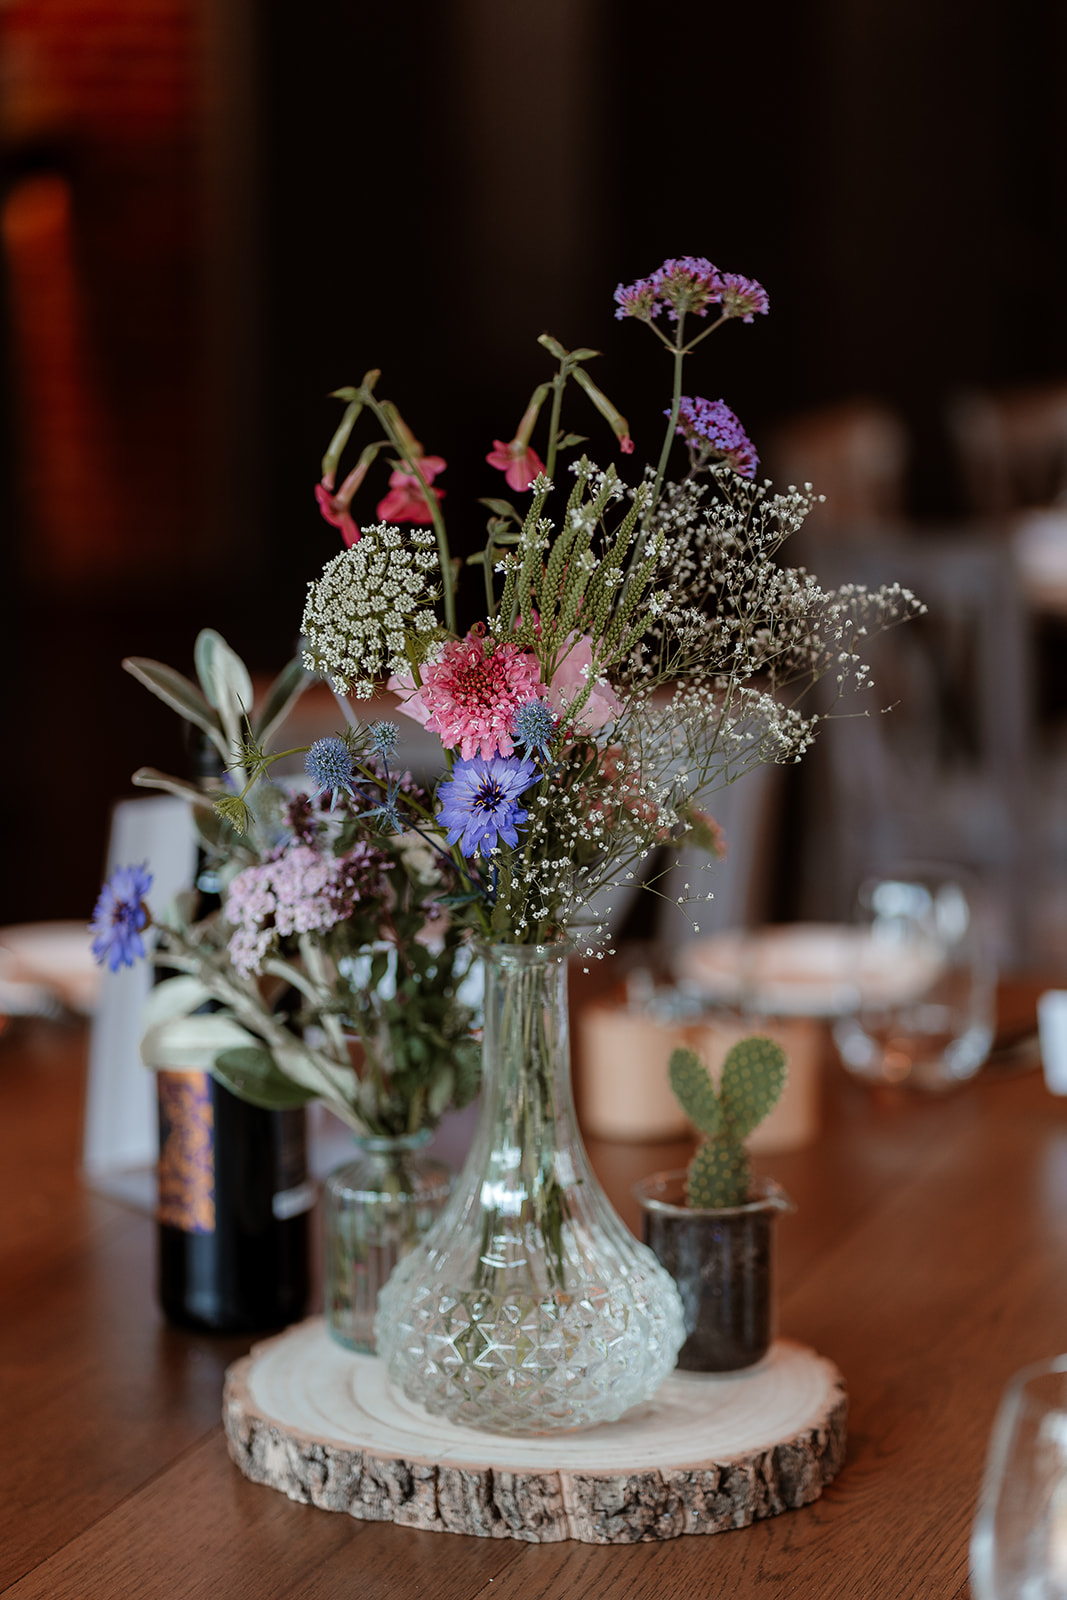 Table decorations with summer flowers at this Syrencot wedding